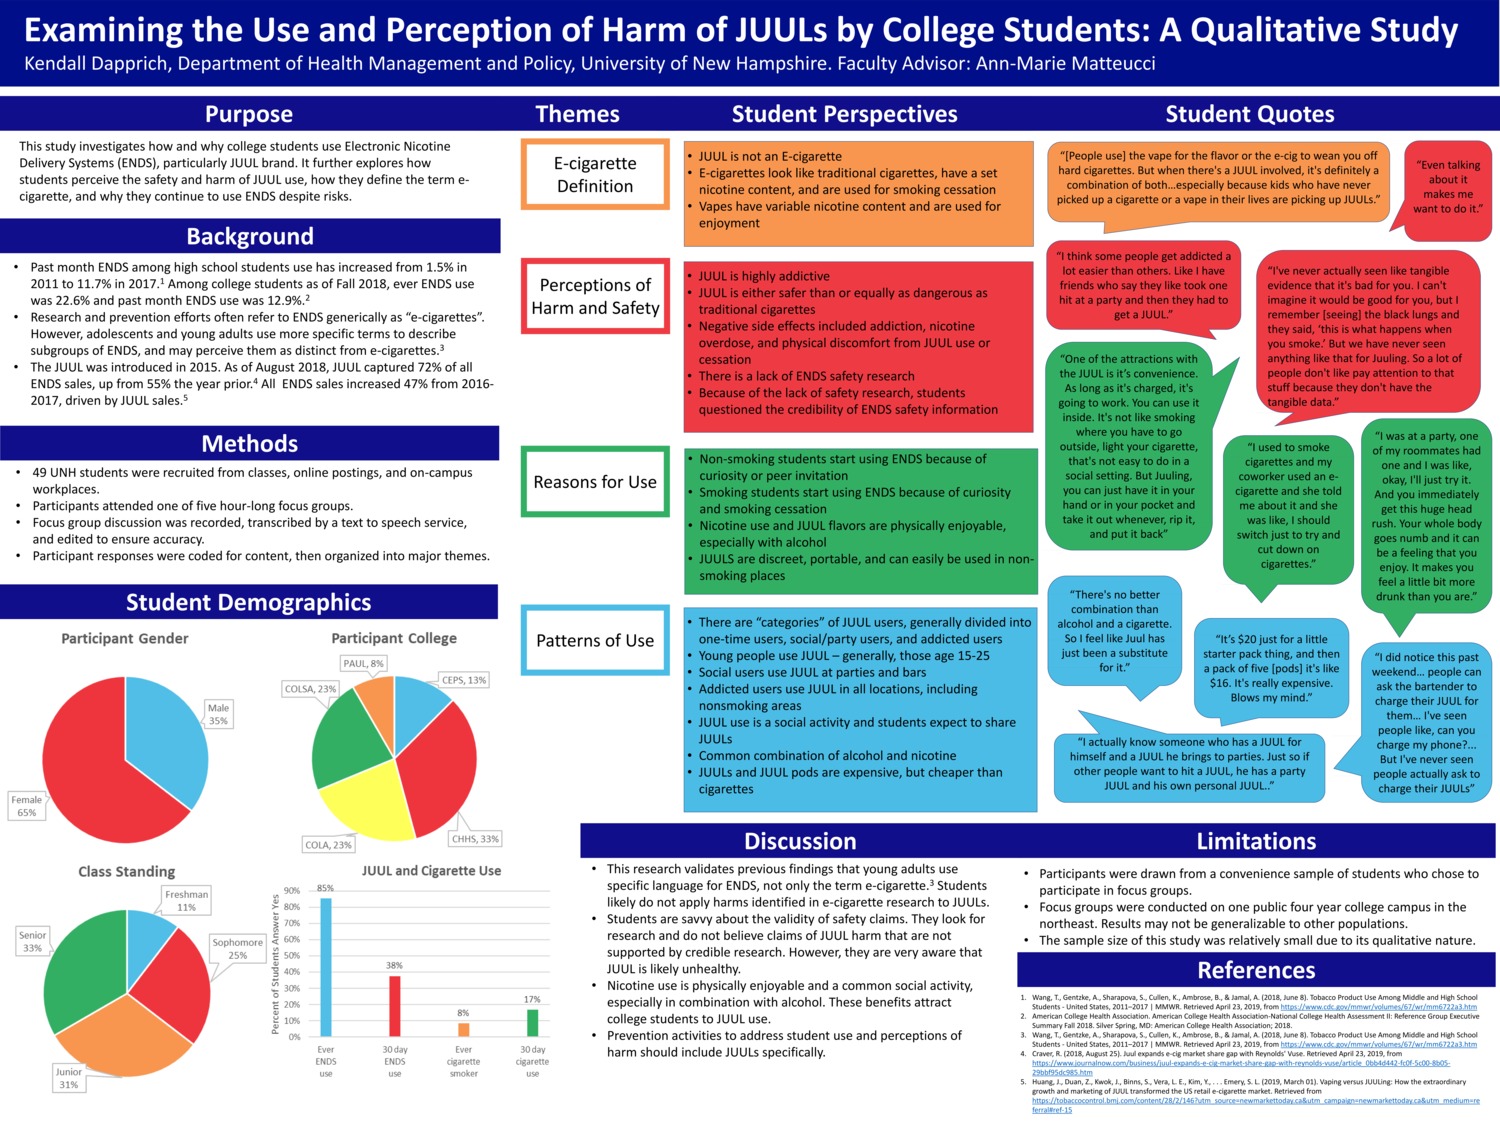 Examining The Use And Perception Of Harm Of Juuls By College Students: A Qualitative Study by kd1035